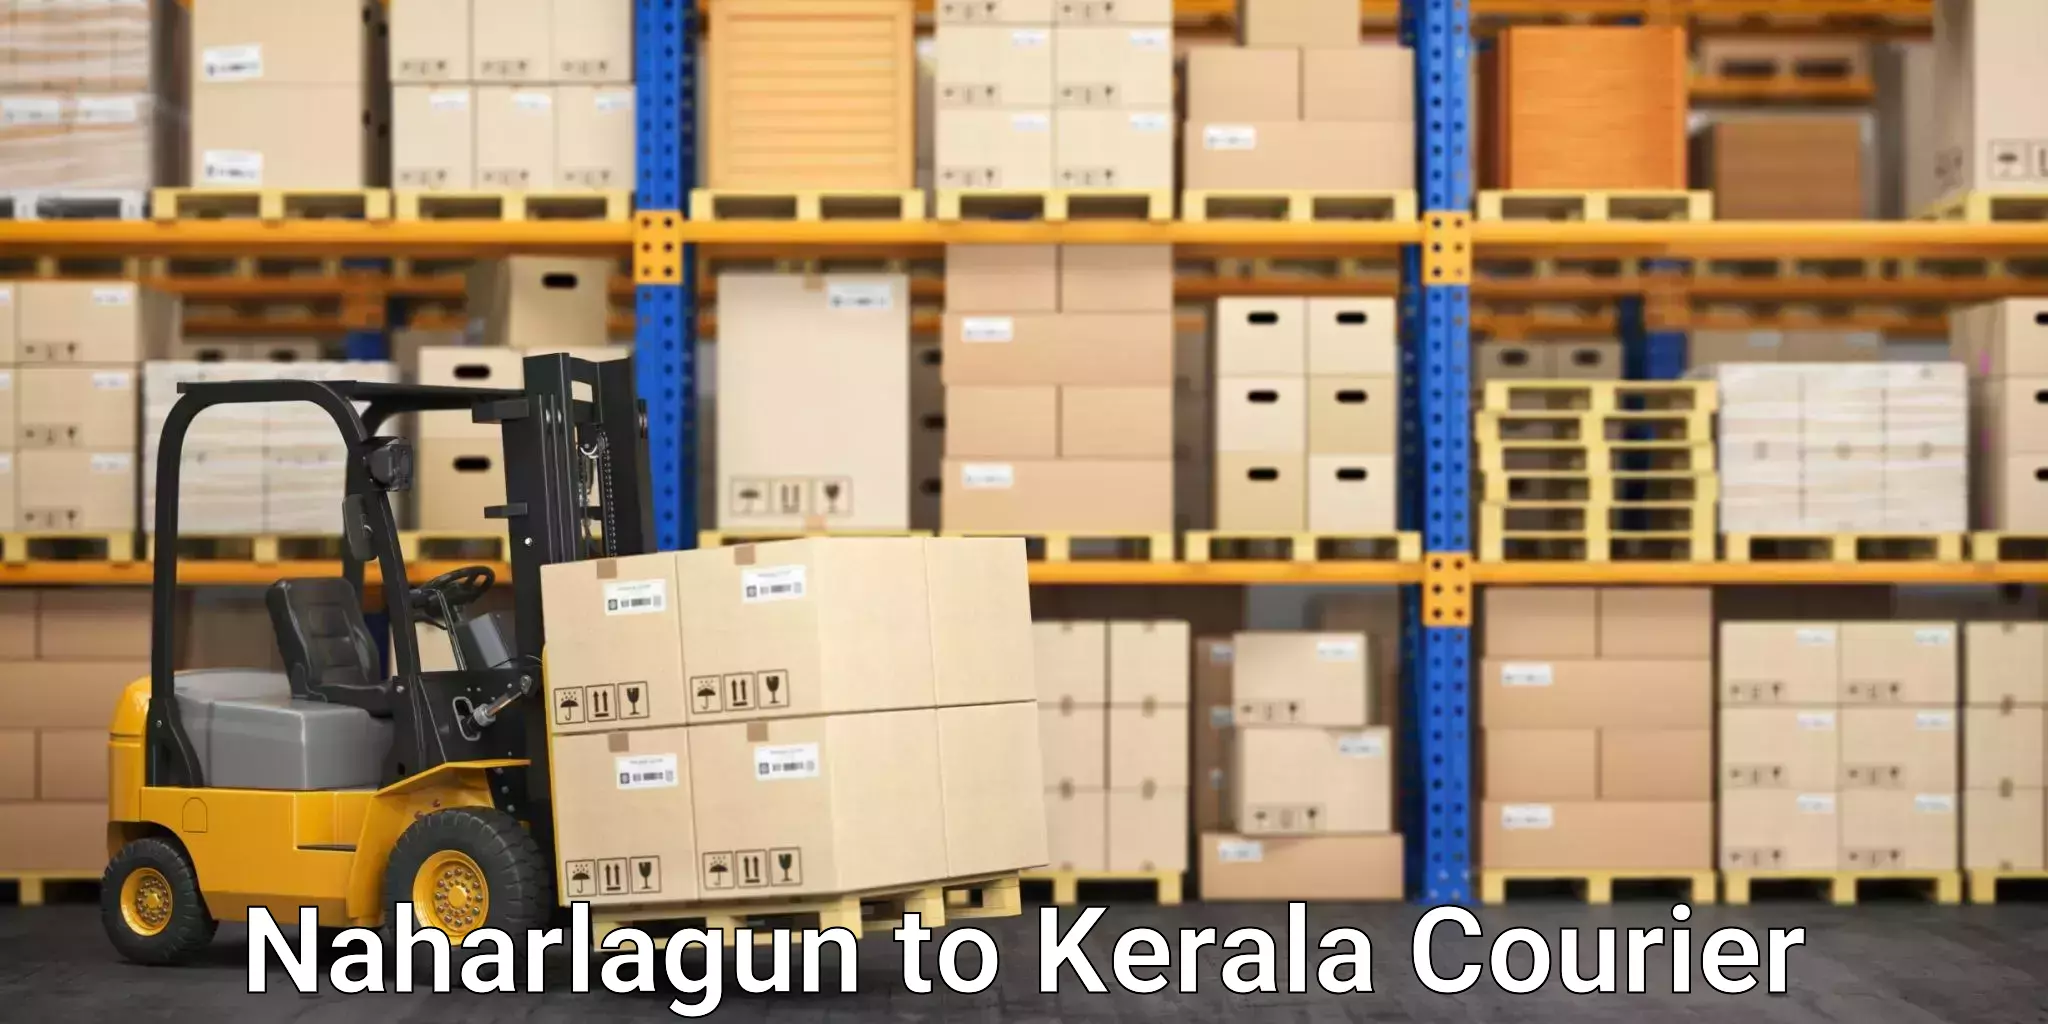 Reliable delivery network Naharlagun to Ernakulam